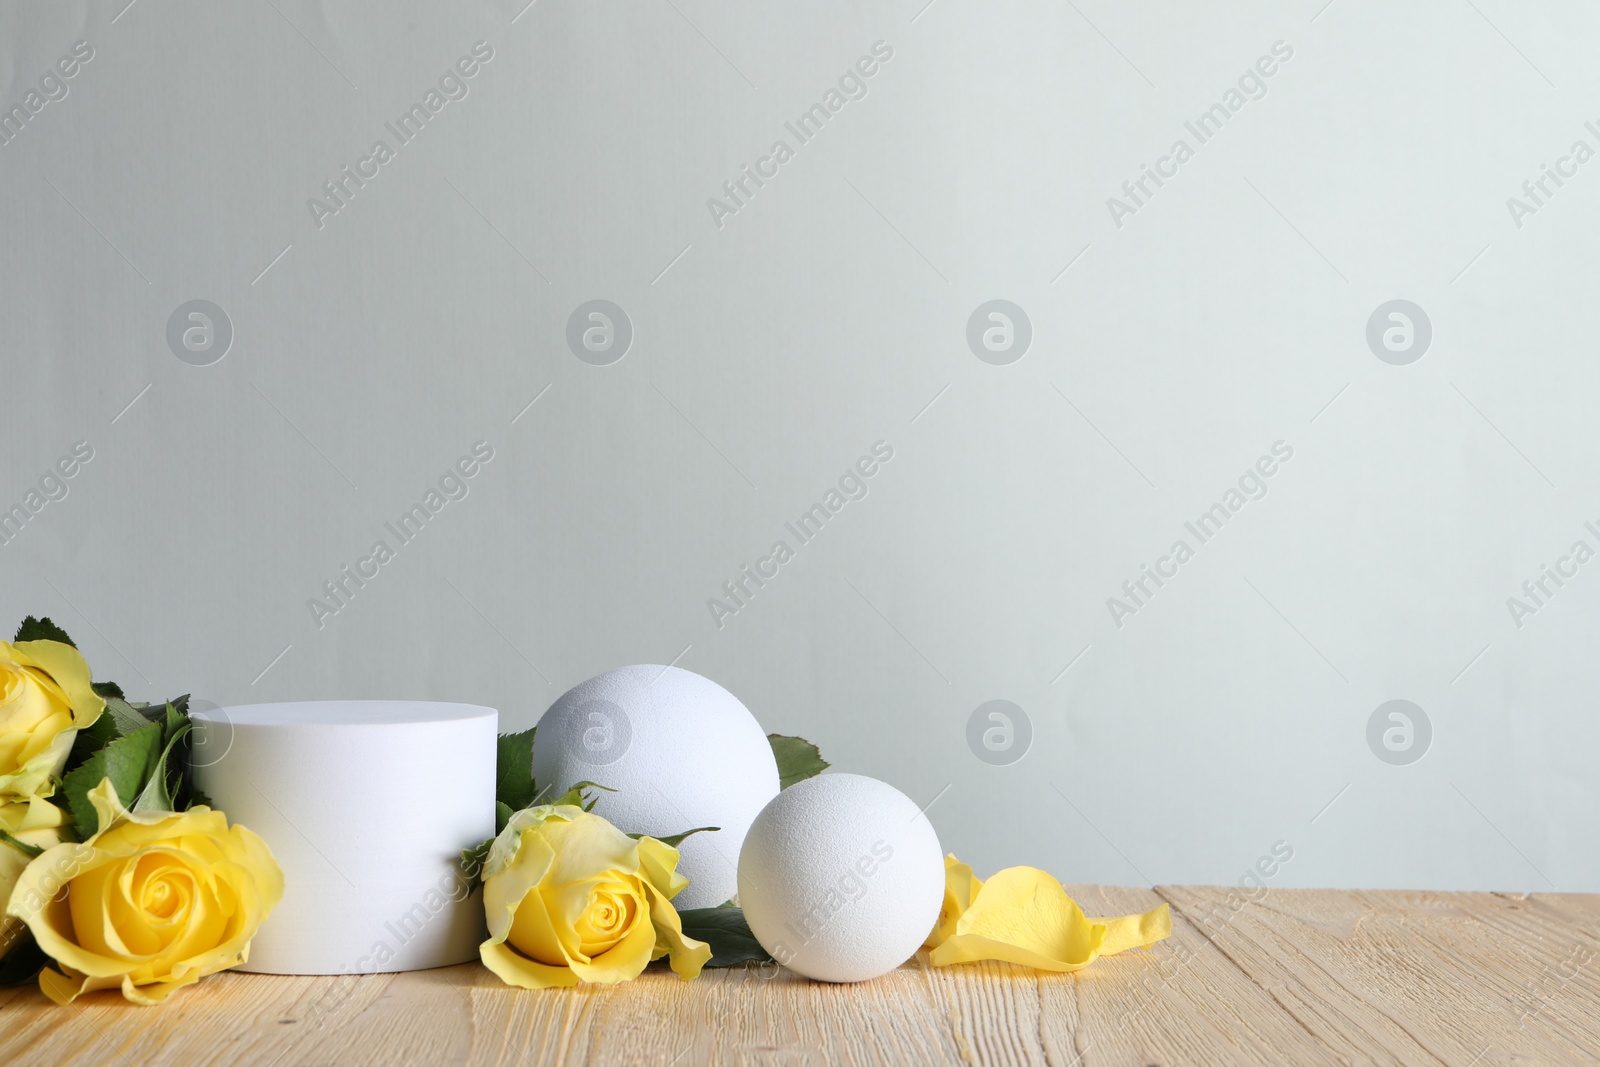 Photo of Beautiful presentation for product. White geometric figures and yellow roses on wooden table against light grey background, space for text